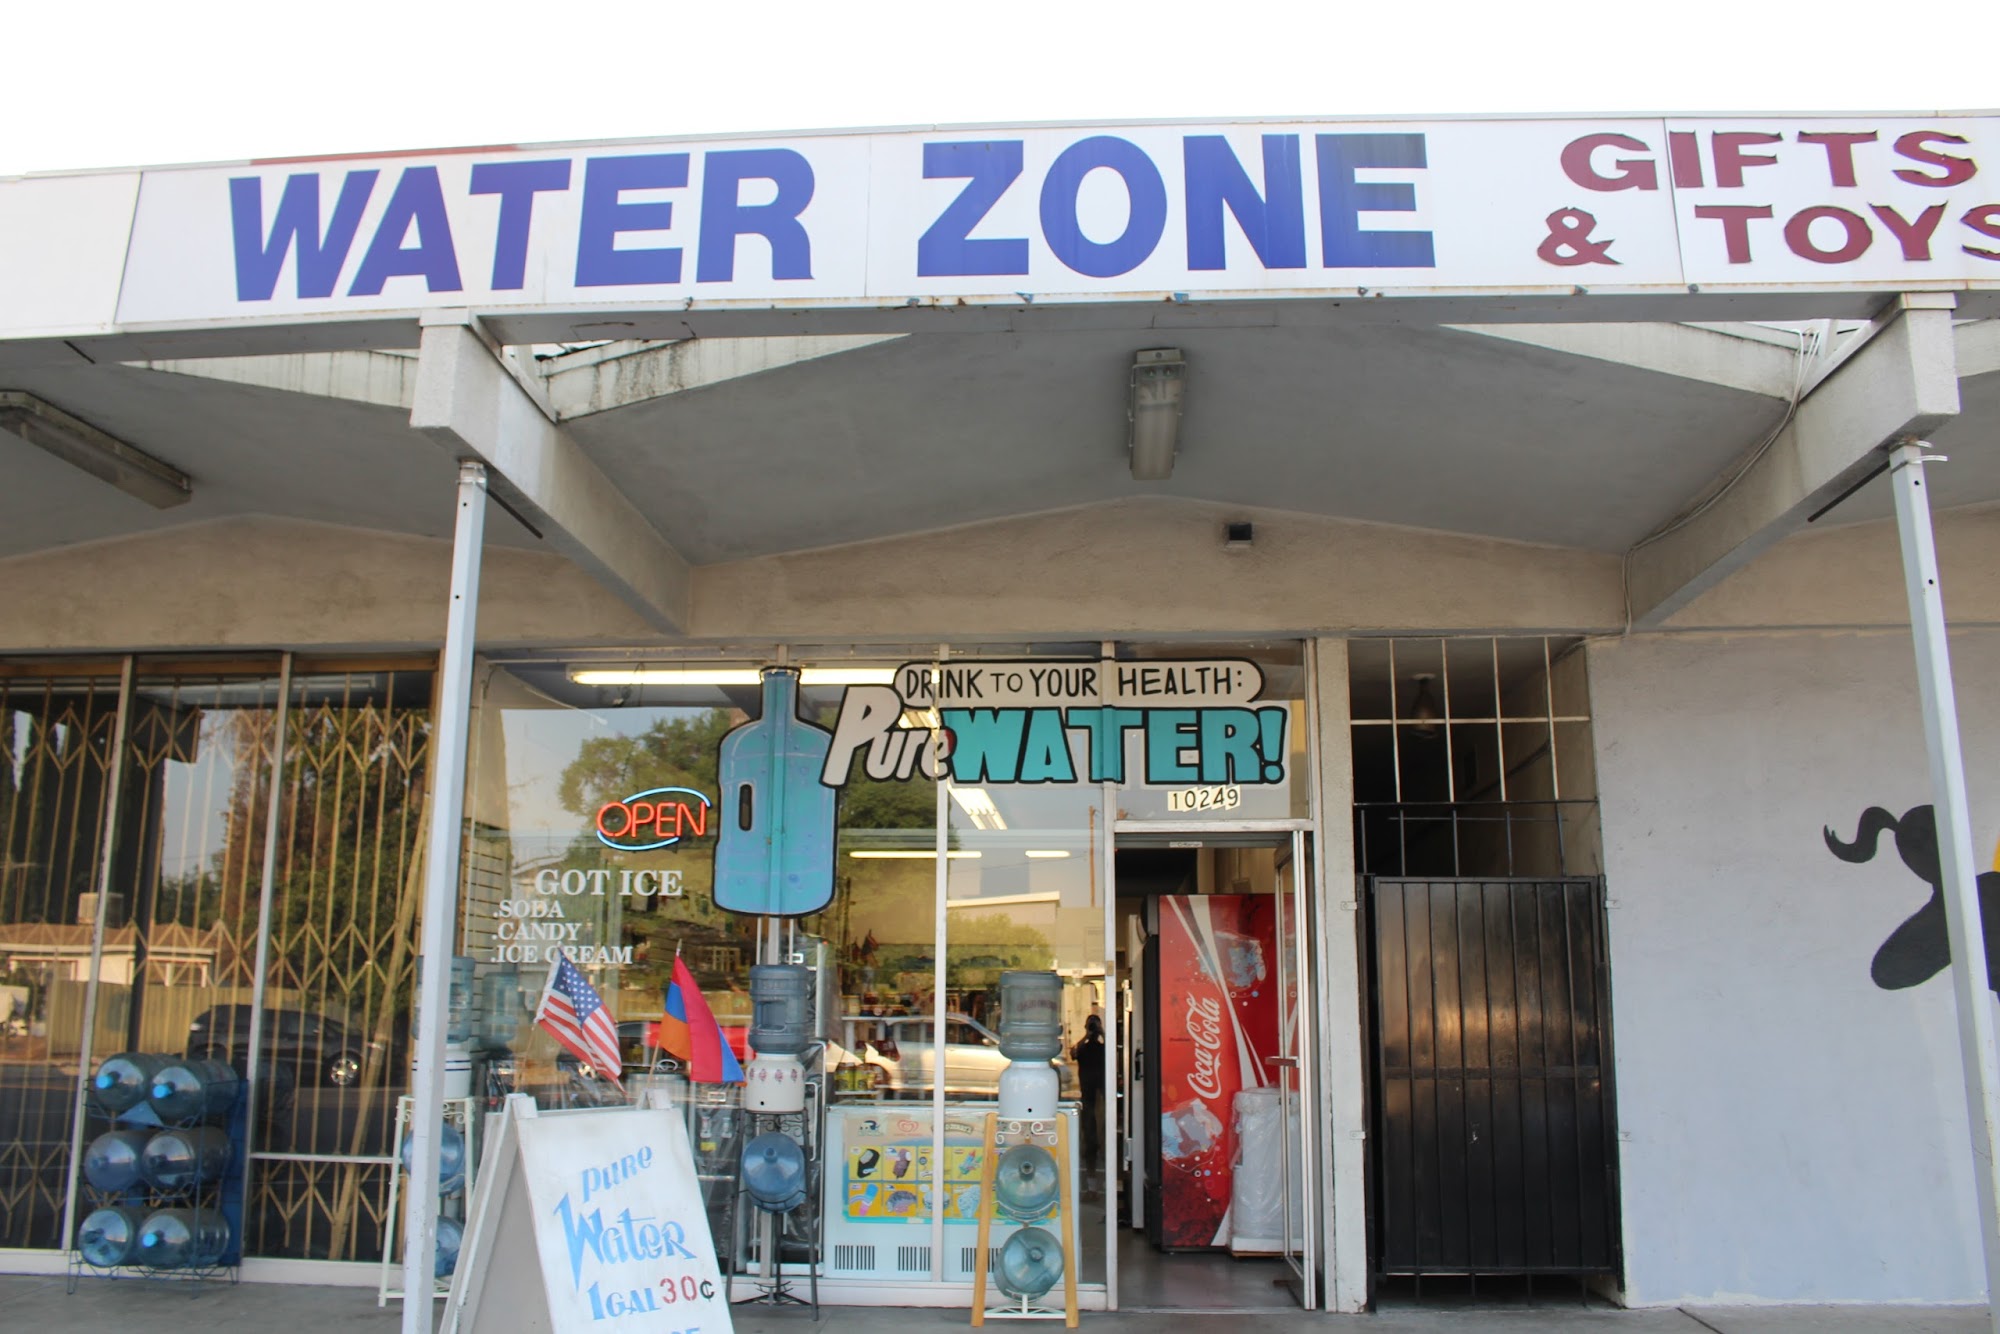 Water Zone Gift & Toys